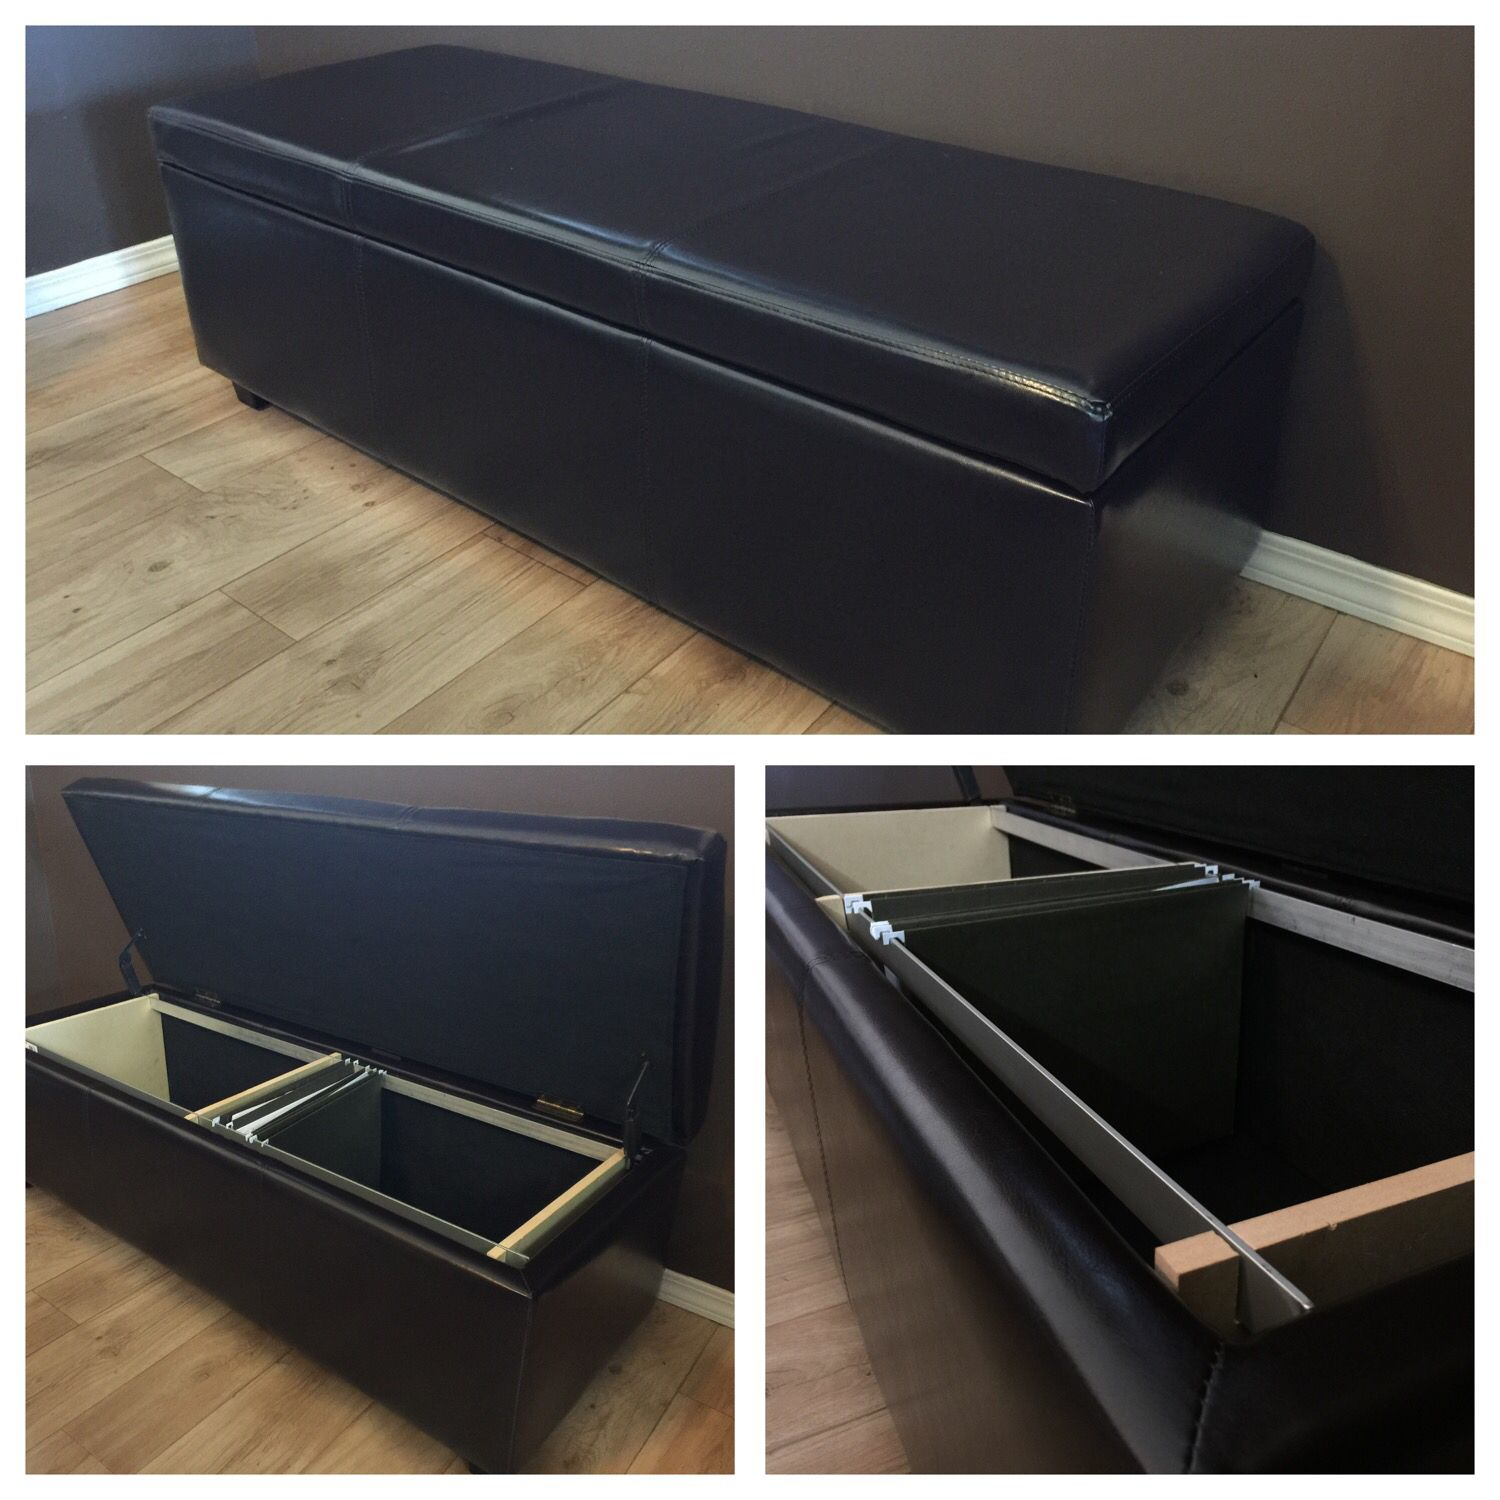 Easy Diy Convert An Ottoman Into A Filing Cabinet Start With An intended for size 1500 X 1500